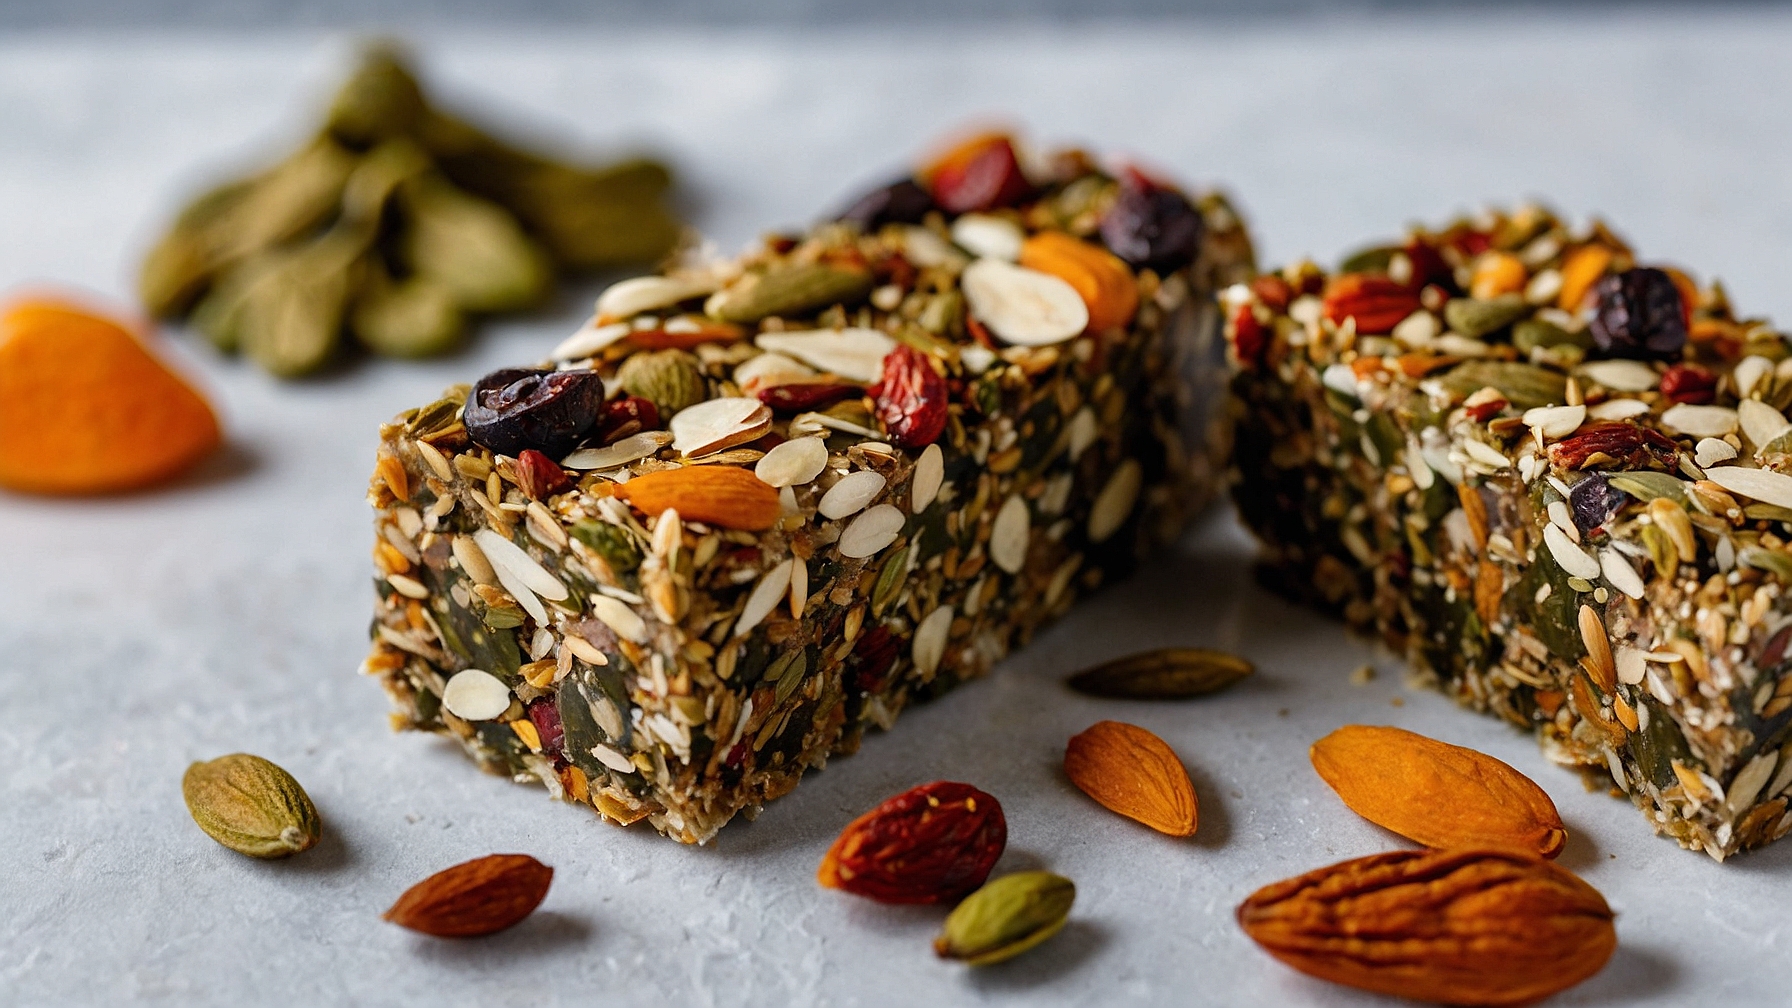 No-bake superfood energy bars next to nuts